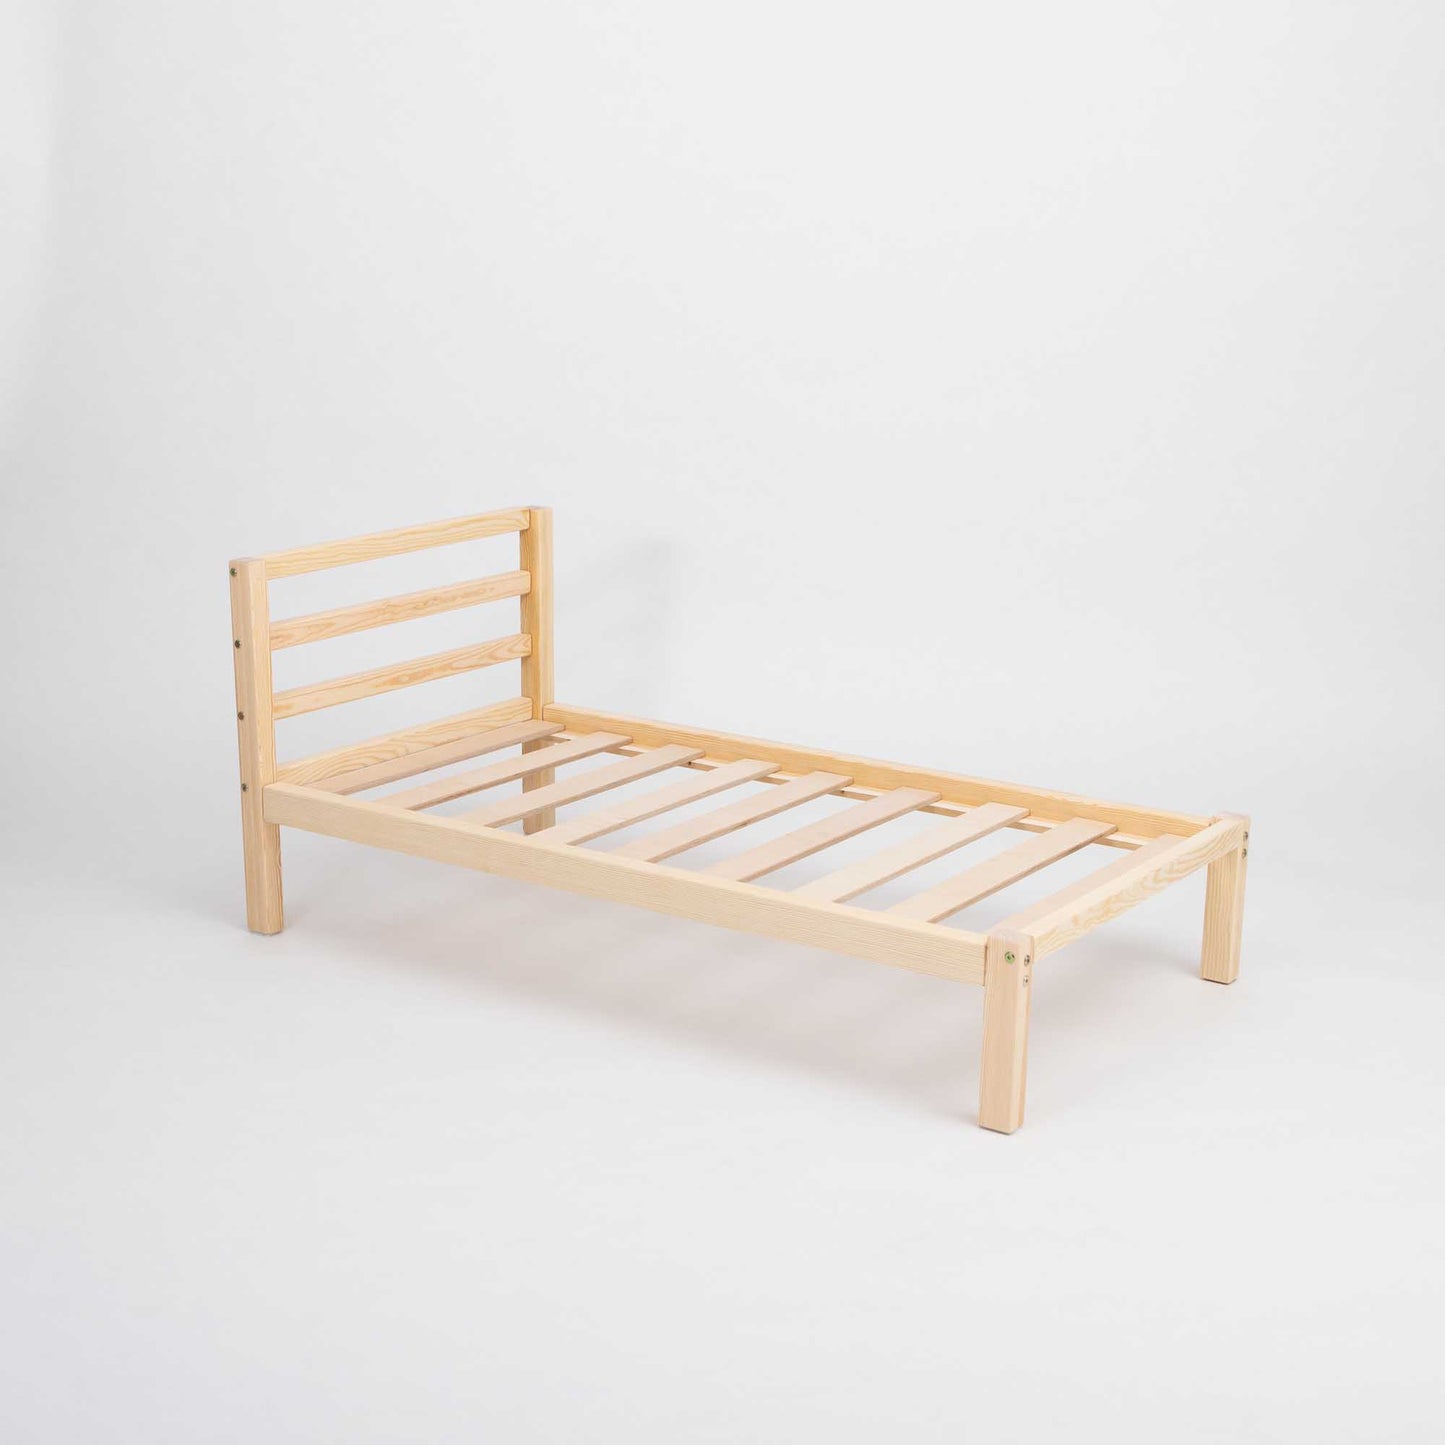 A Kids' bed on legs with a horizontal rail headboard from Sweet Home From Wood, with slats on a white background.